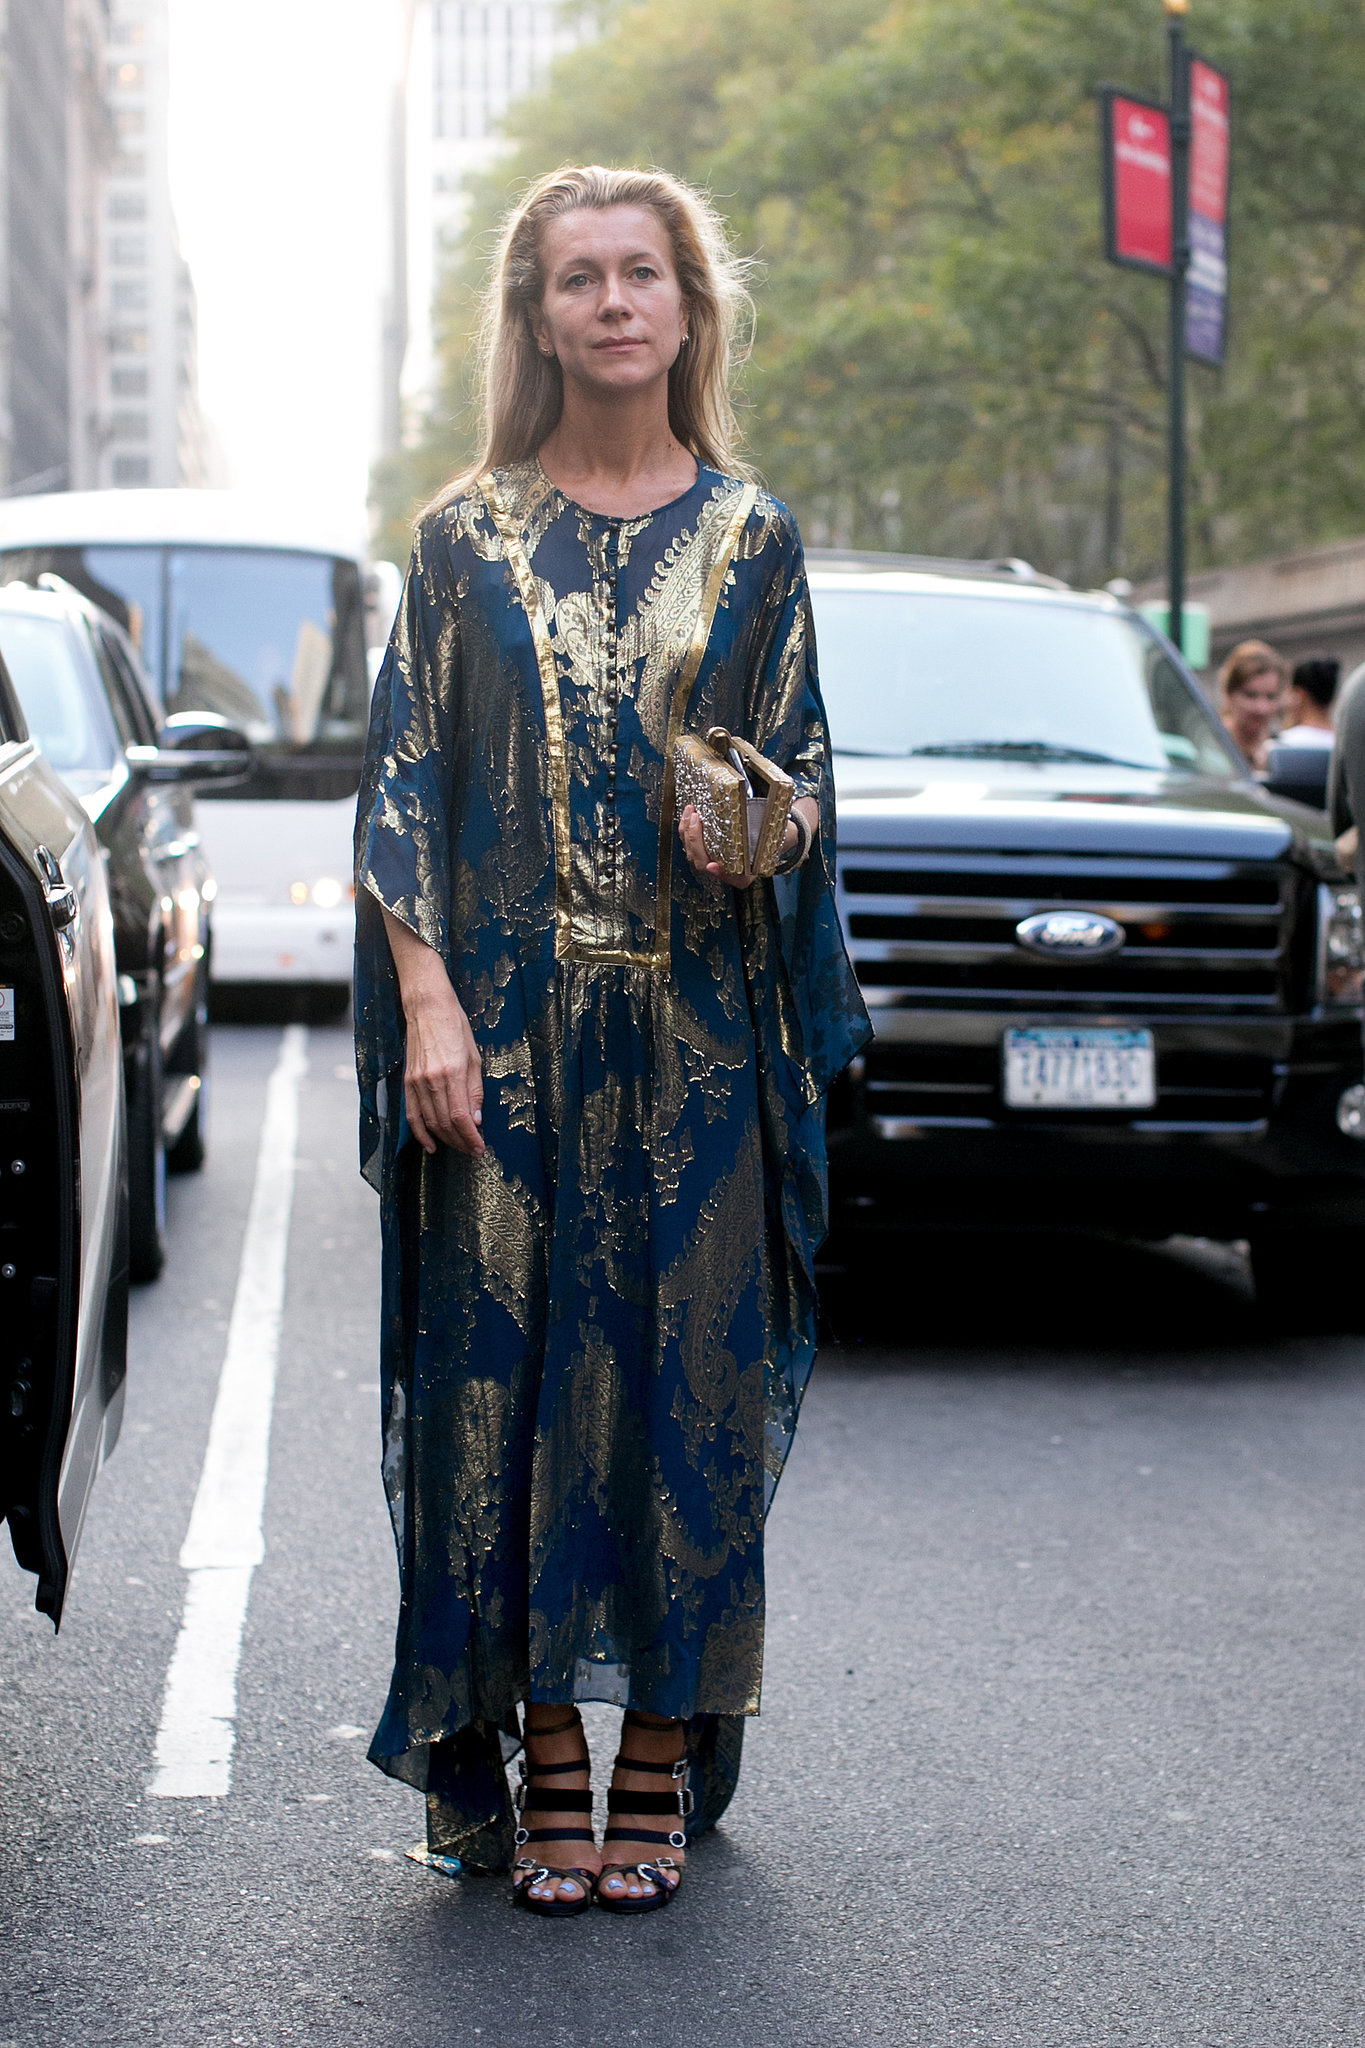 Natalie Joos dressed for the NYC heat wave in a gilded caftan. 
